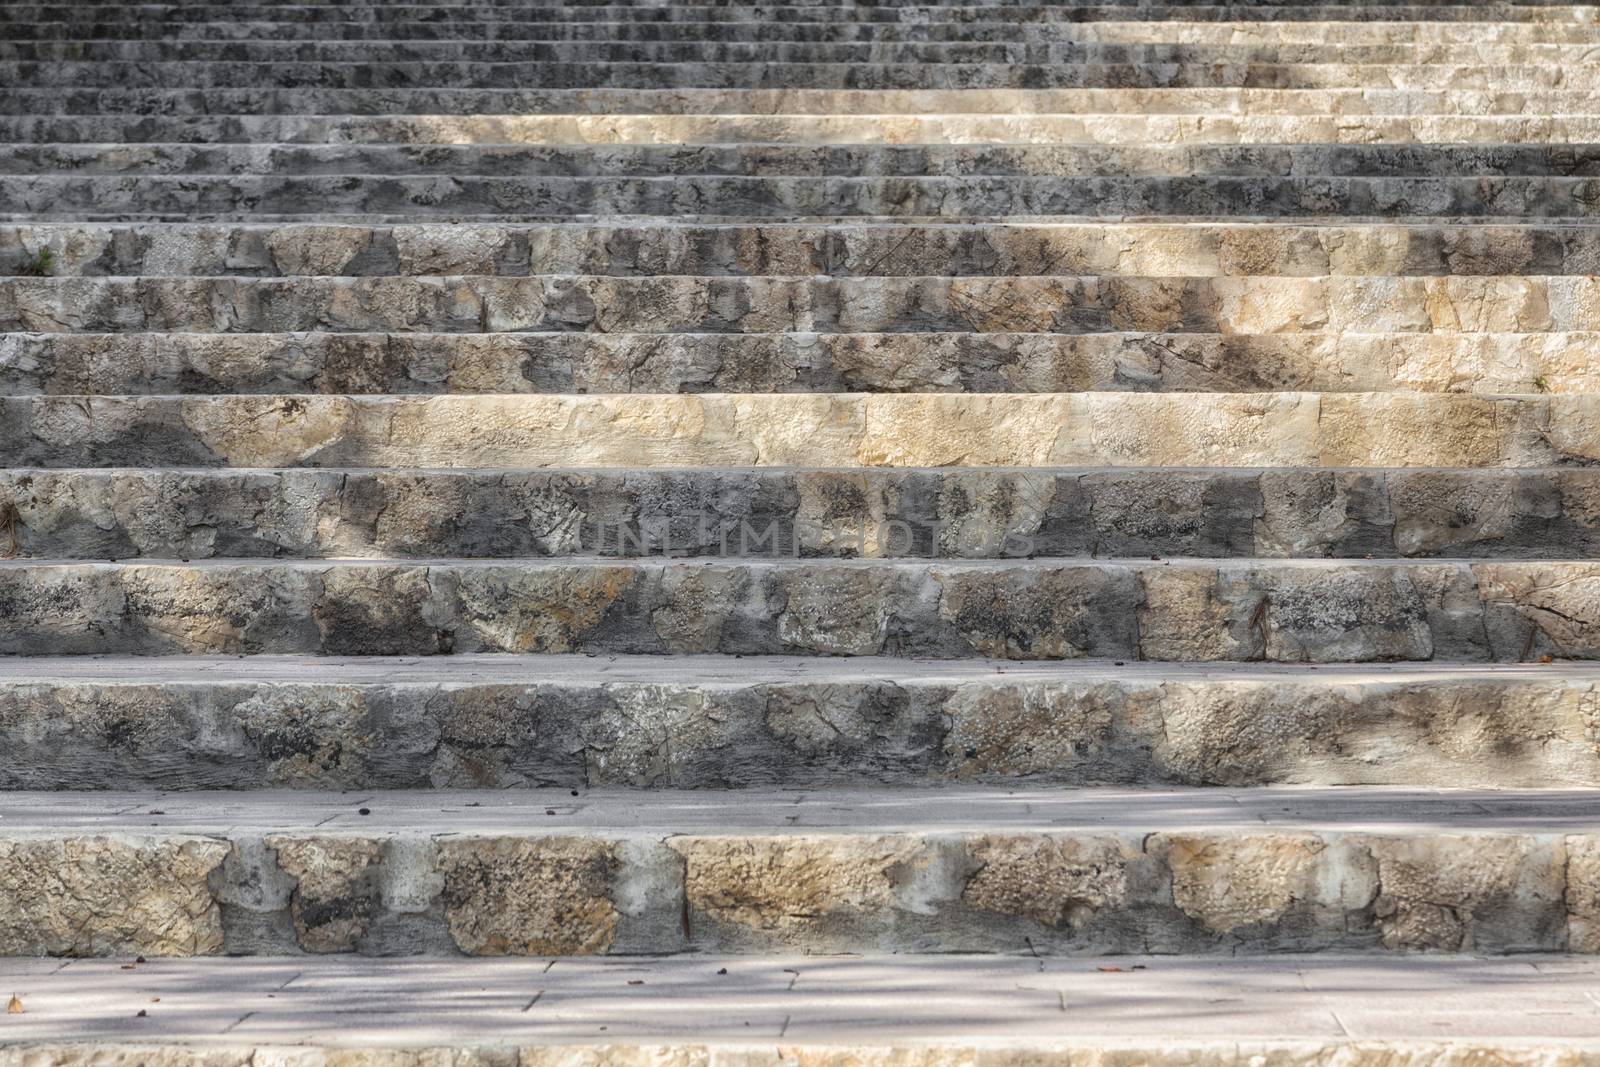 Stair steps of stone which lead upwards